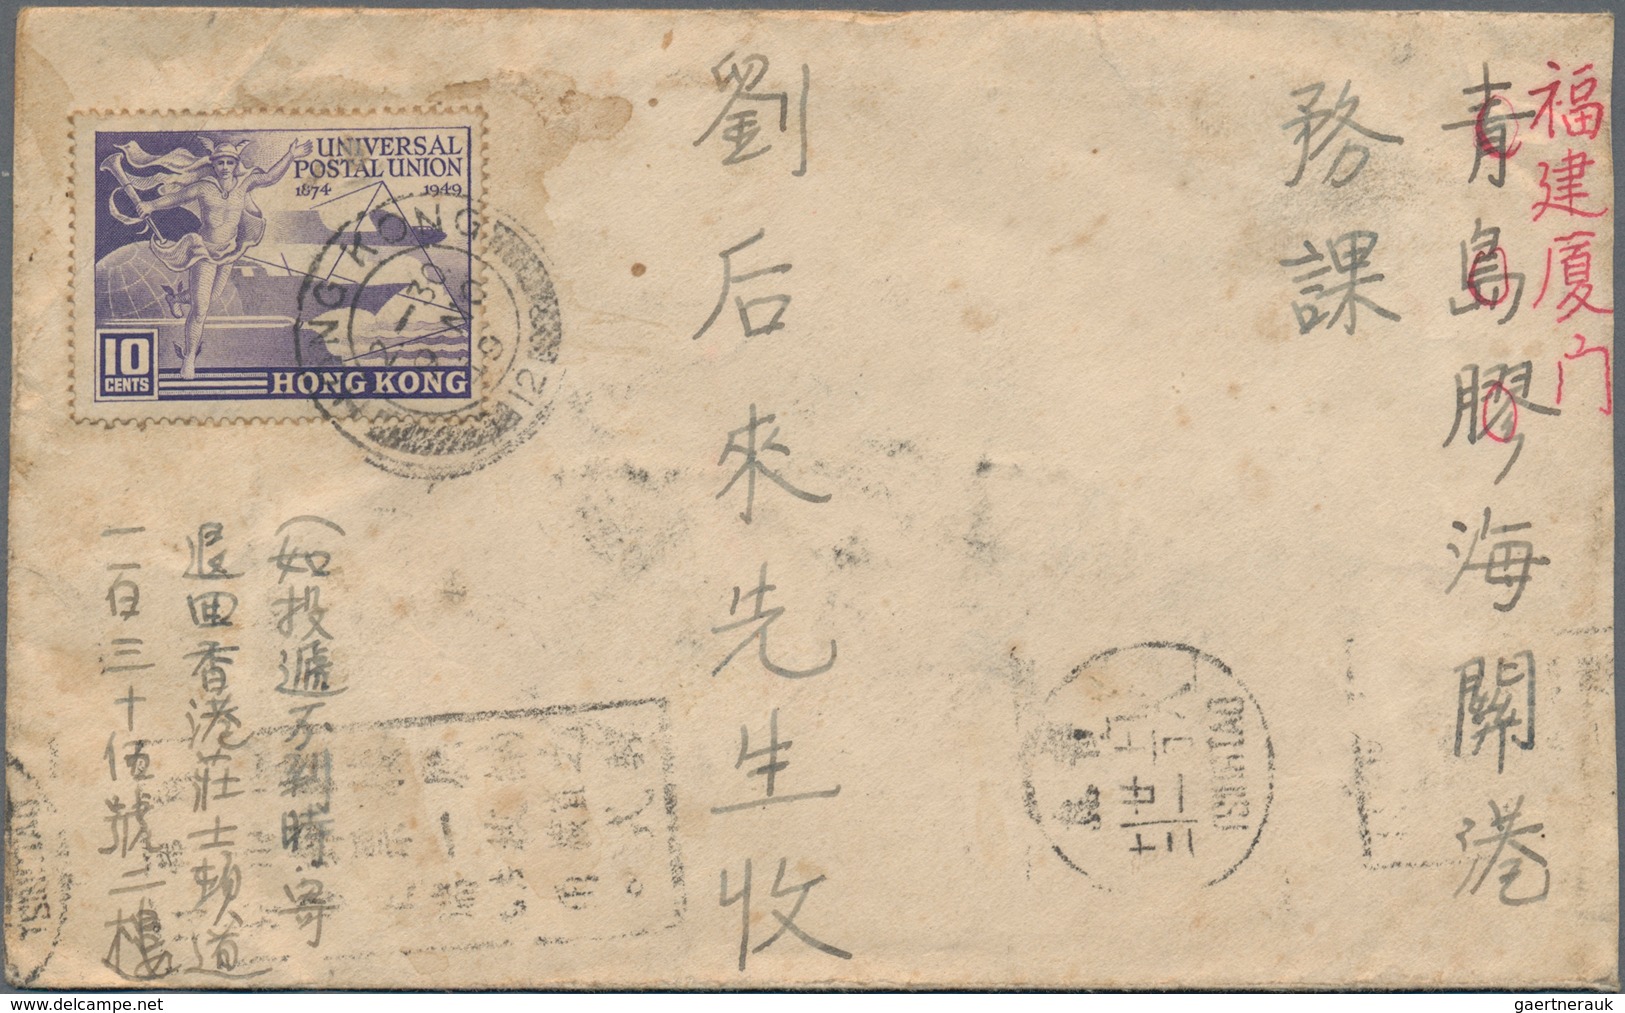 Hongkong: 1901/49, ppc (4) and covers (4) inc. QV used from CANTON, KEVII 4 C. on ppc with Siemssen&